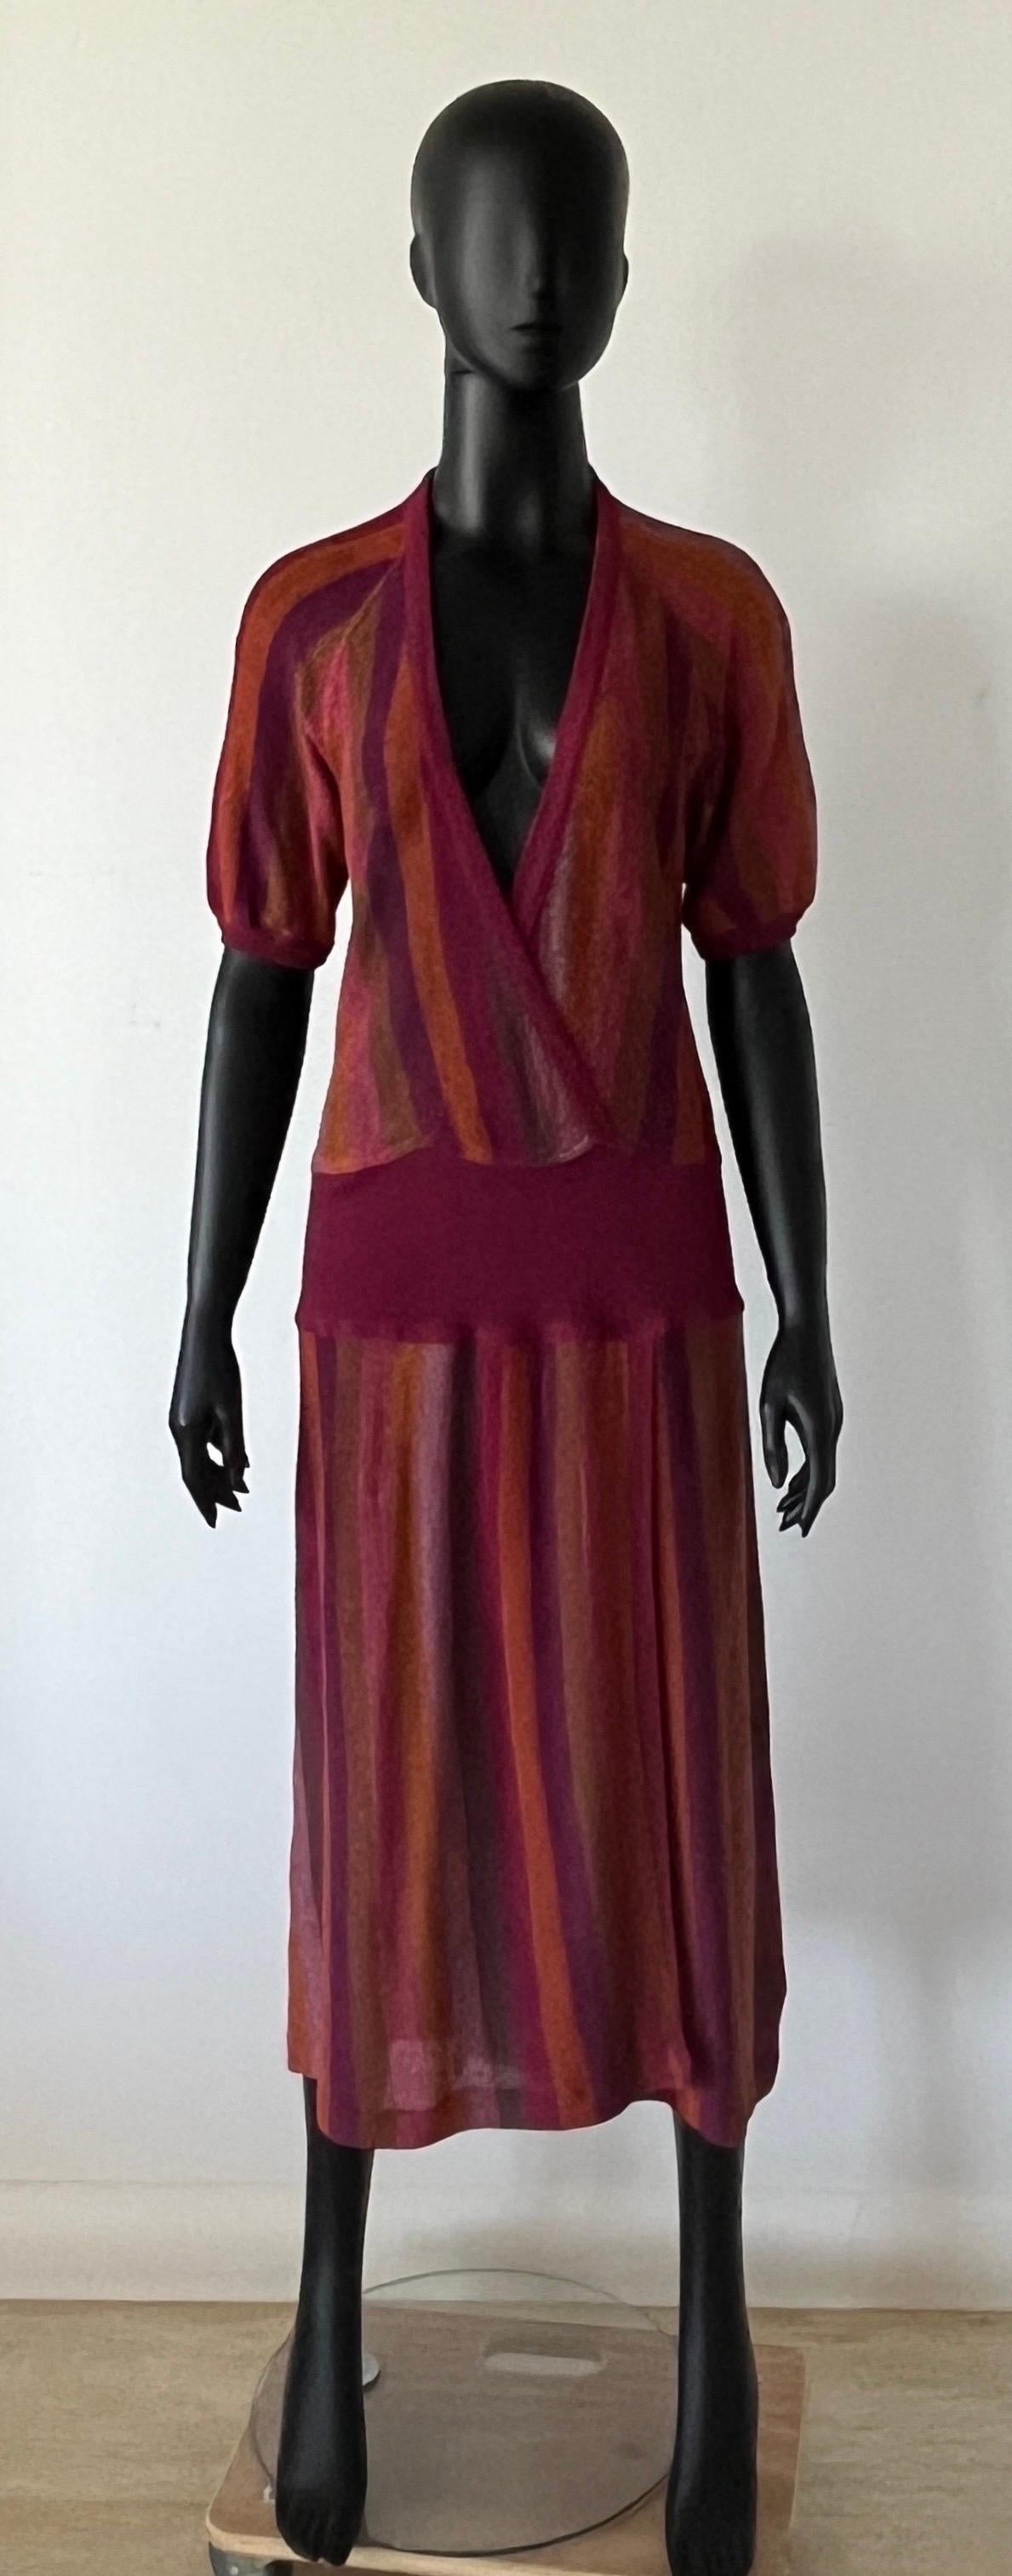 VINTAGE MISSONI

Beautiful Vintage MISSONI striped Dress

MULTI COLOURED KNIT

MADE IN ITALY

SIZE SMALL -MEDIUM.

GOOD CONDITION. CONSISTENT WITH AGE AND DOES HAVE SOME SLIGHT DISCOLOURATION TO LABEL.

Missoni is an Italian luxury fashion house